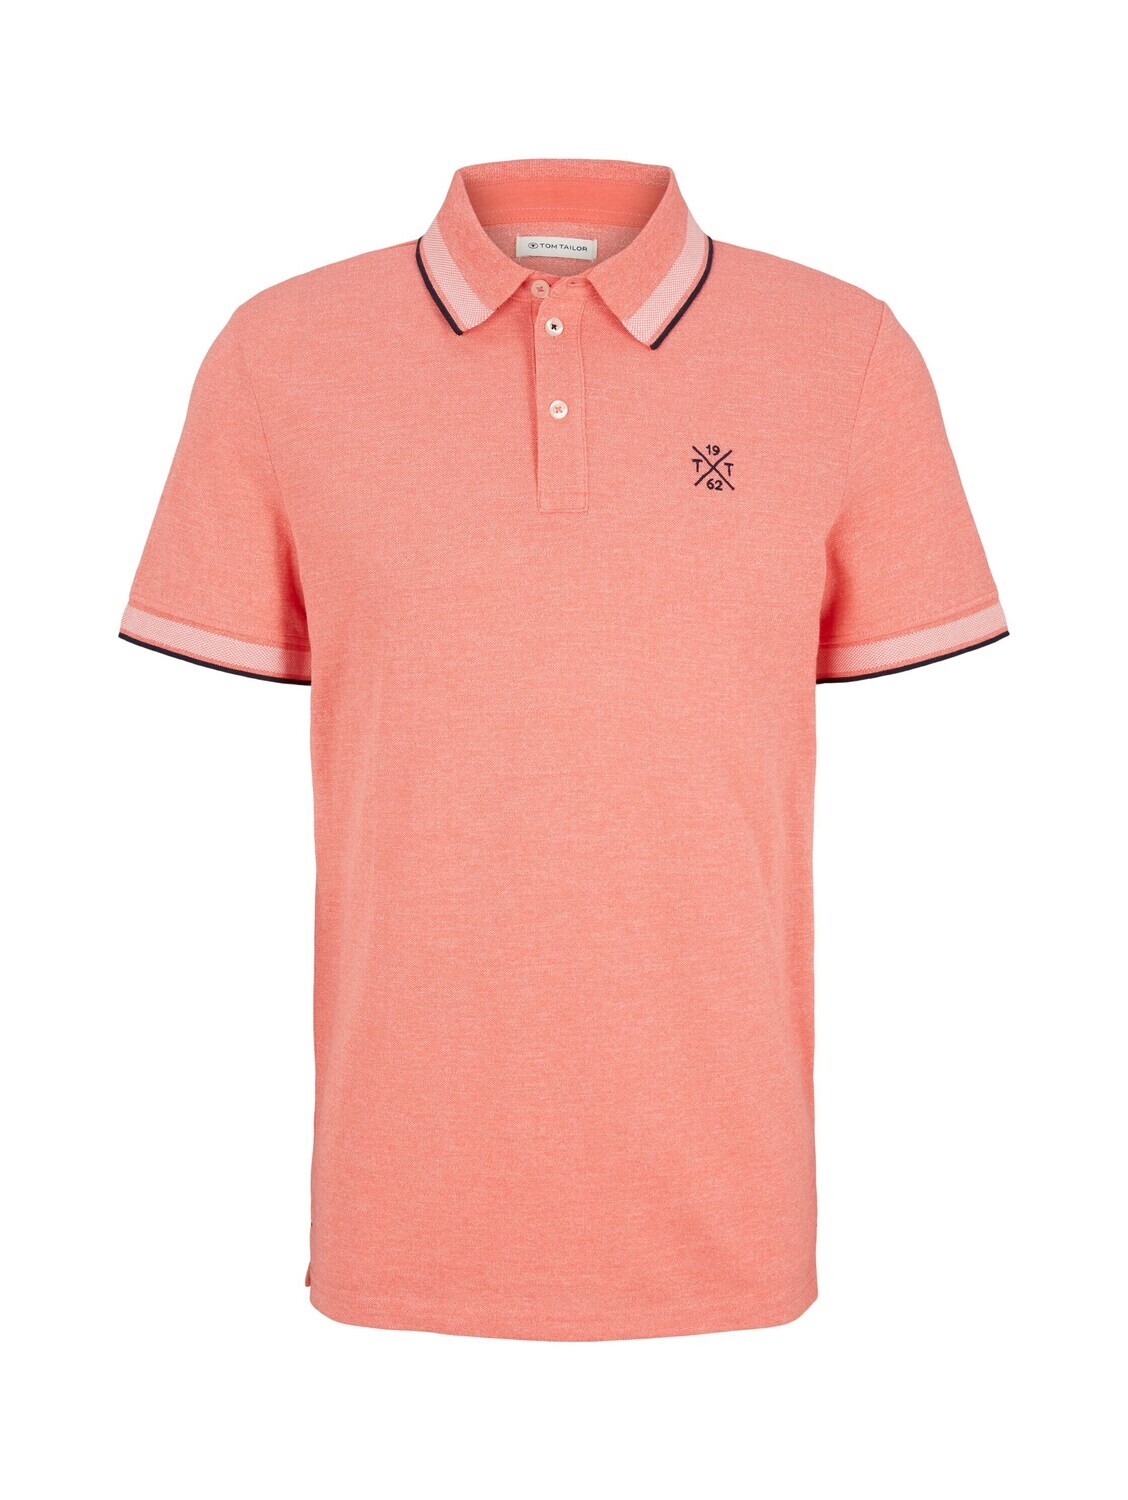 Tom Tailor polo, coral streaky two tone